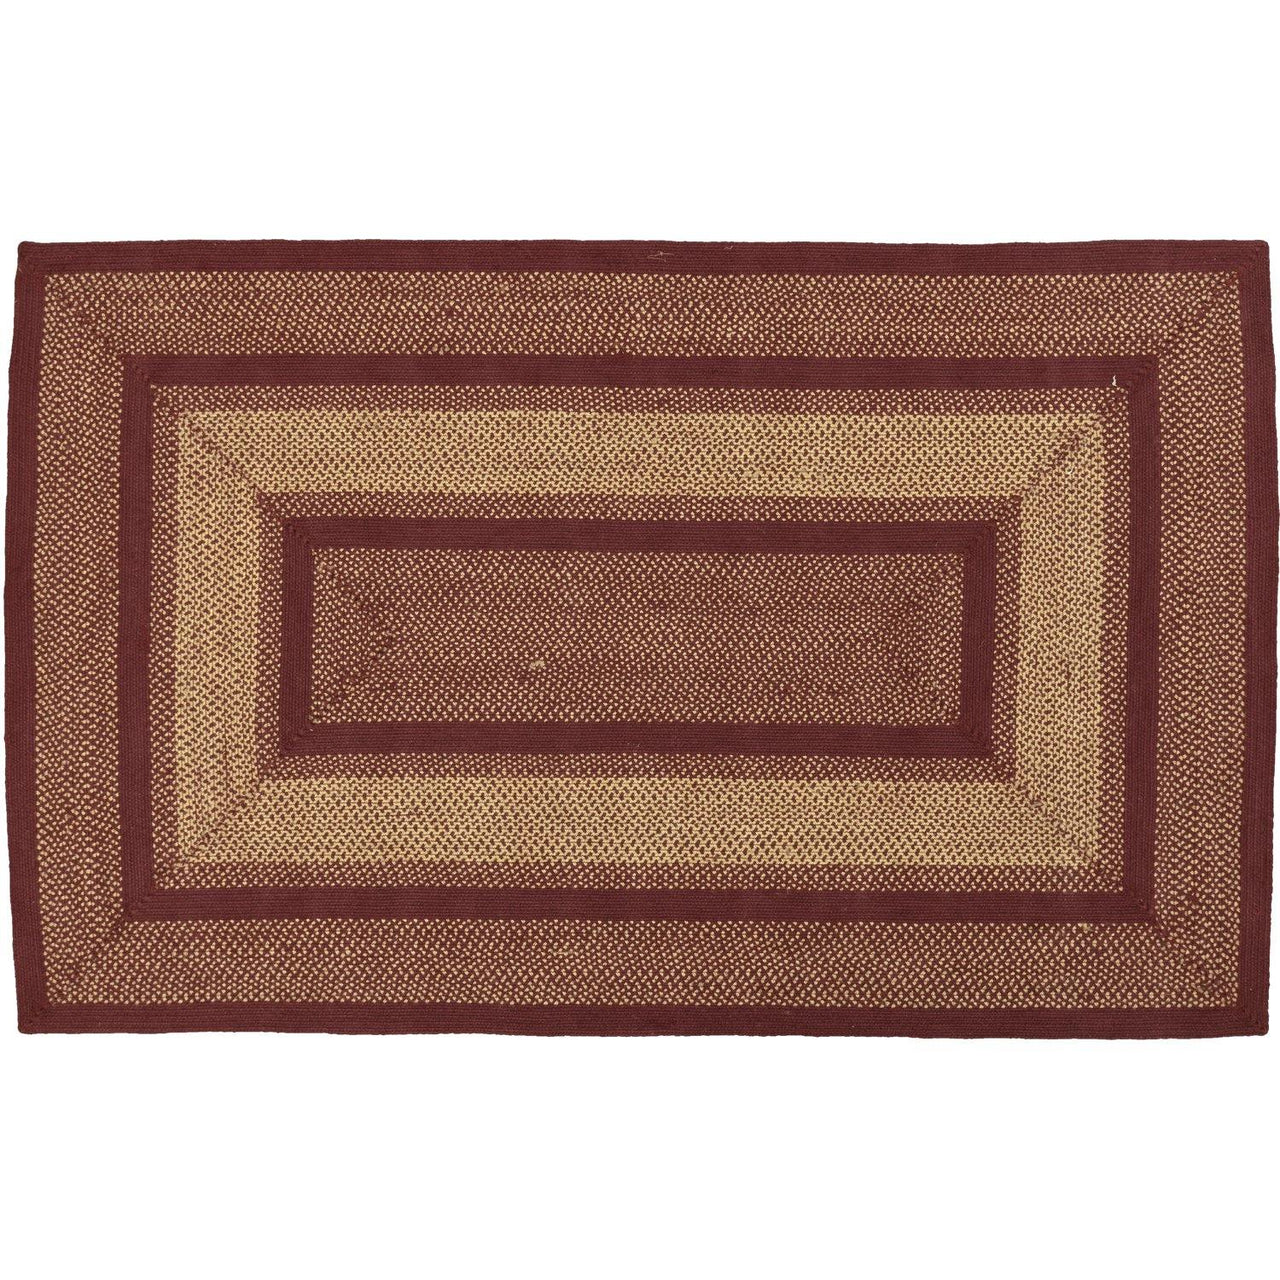 Burgundy Red Primitive Jute Braided Rug Rect 5'x8' with Rug Pad VHC Brands - The Fox Decor